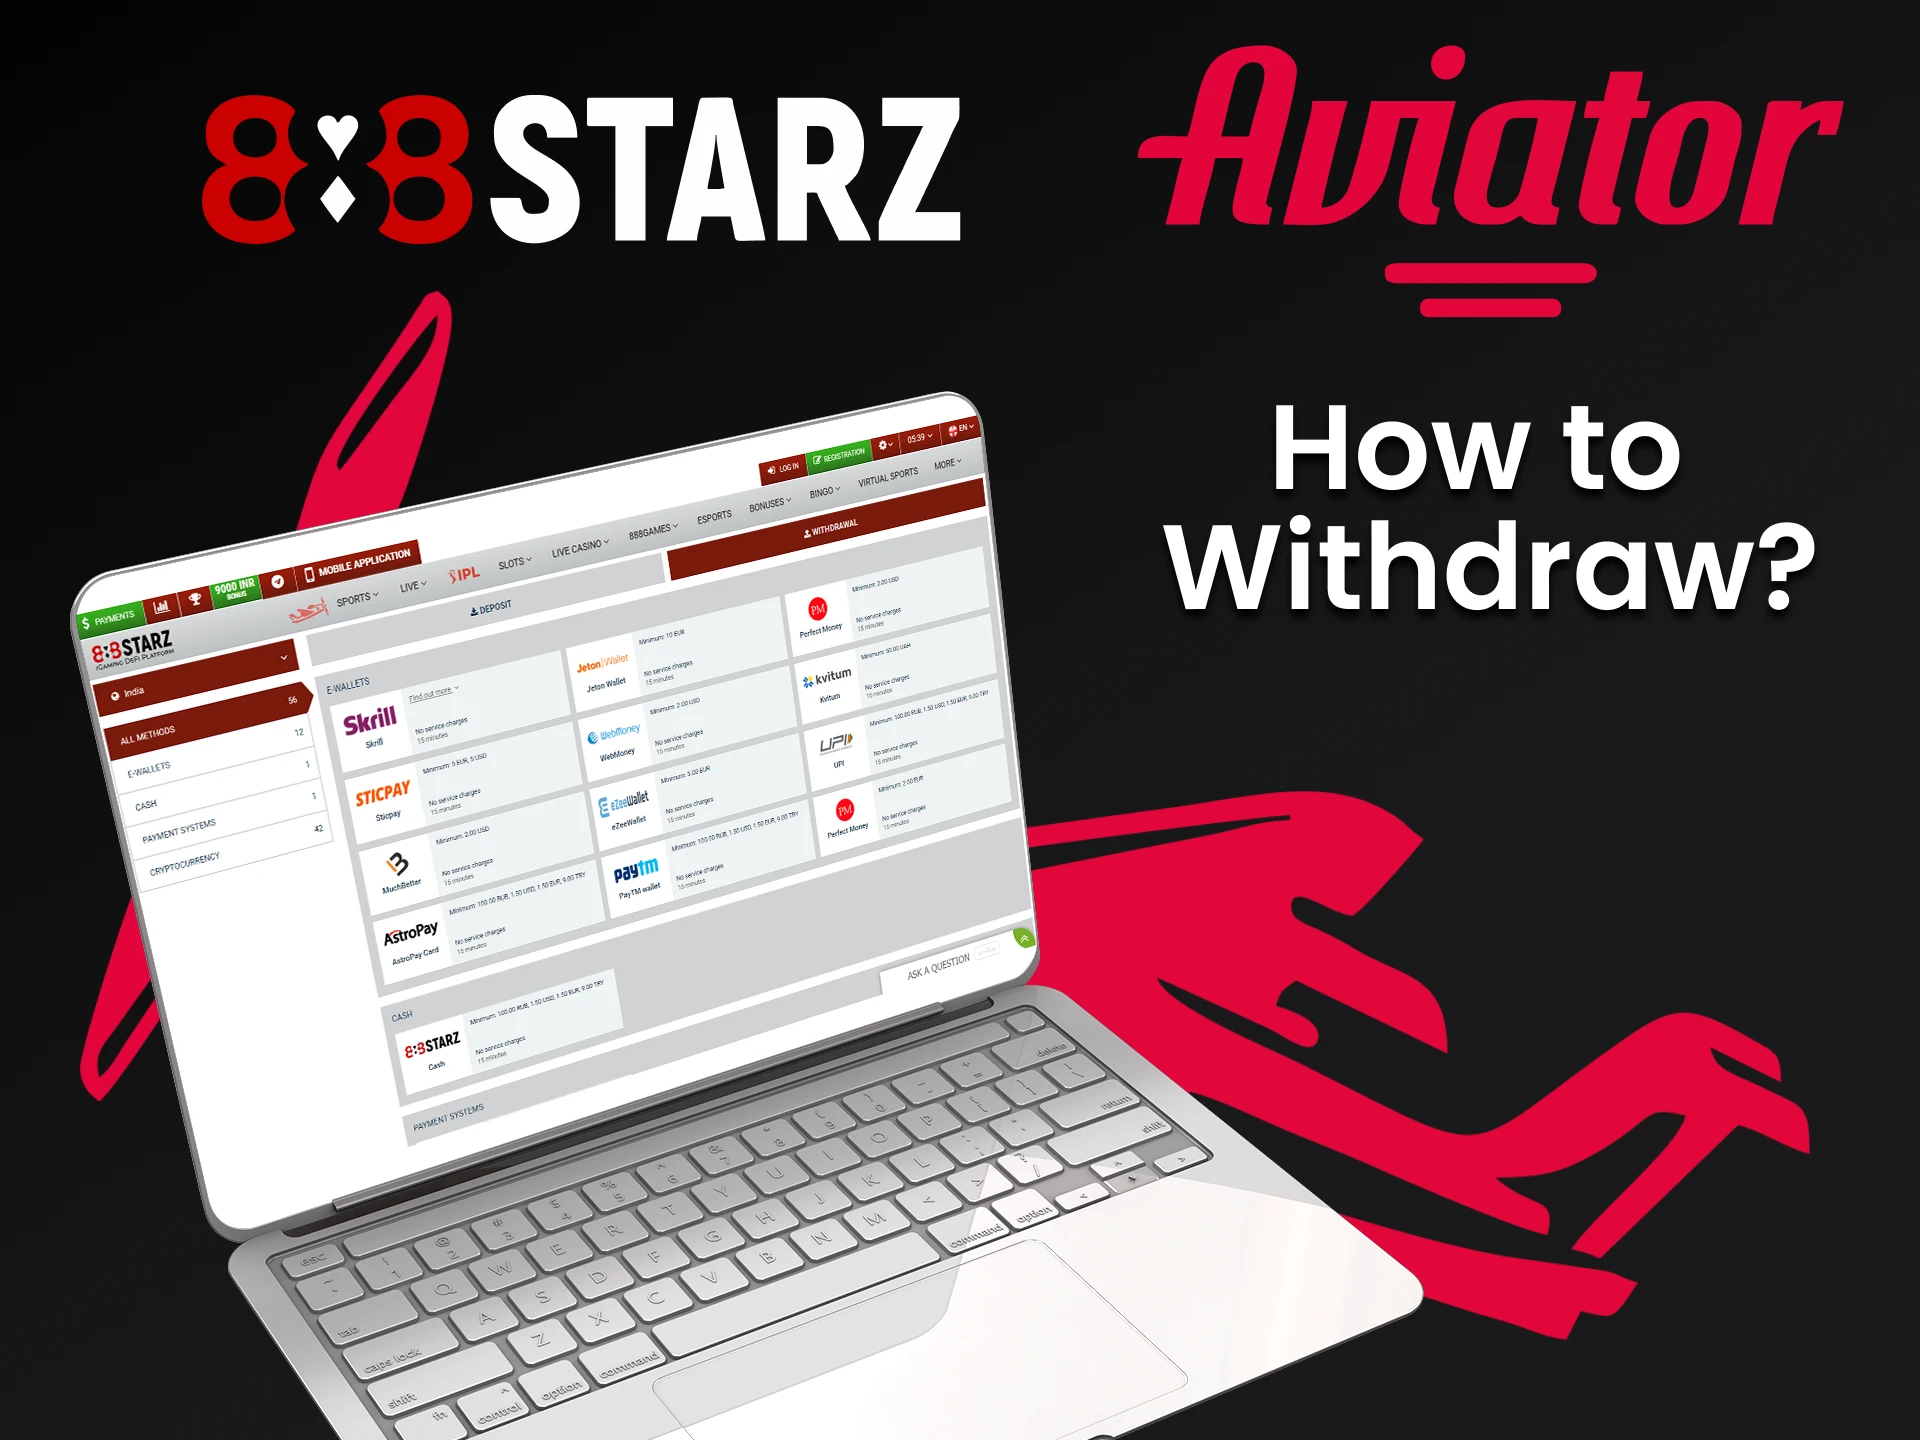 Choose a convenient way to withdraw funds from 888starz.